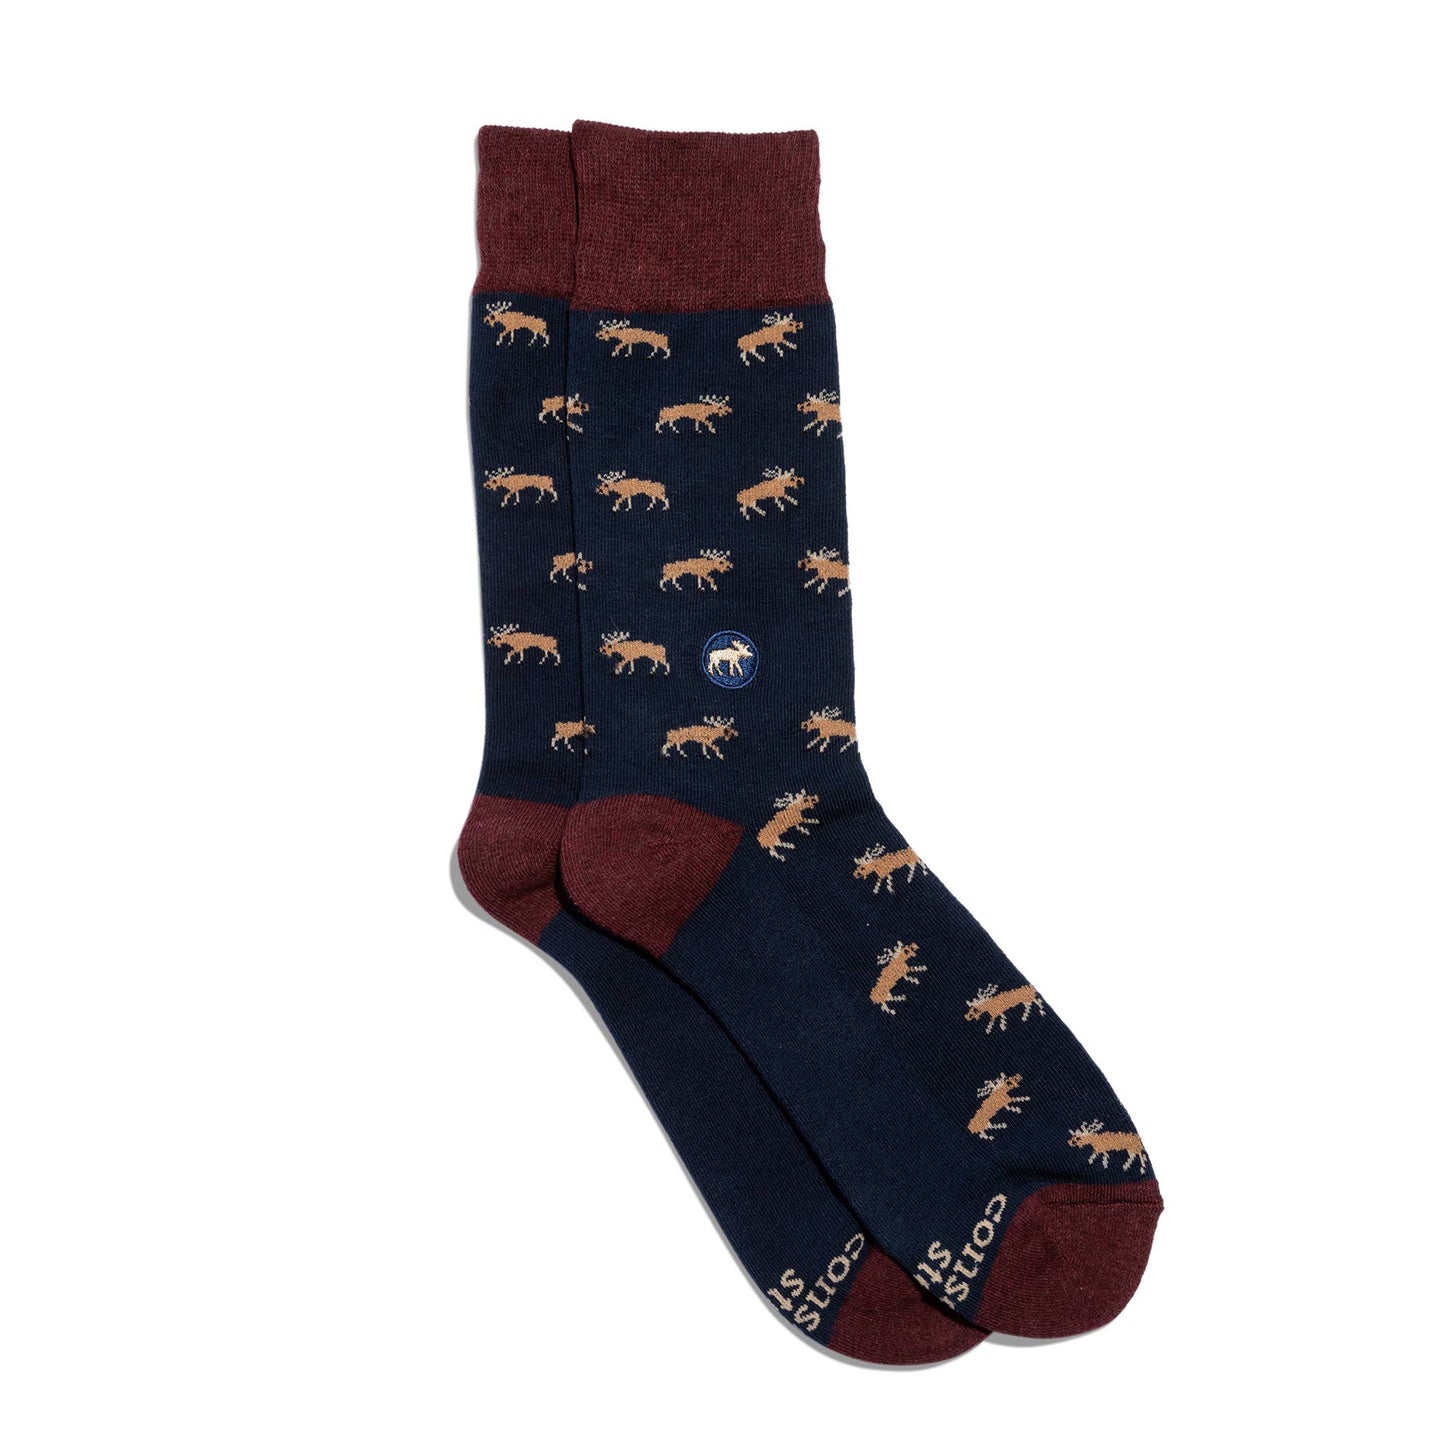 Socks that Protect Moose: Small